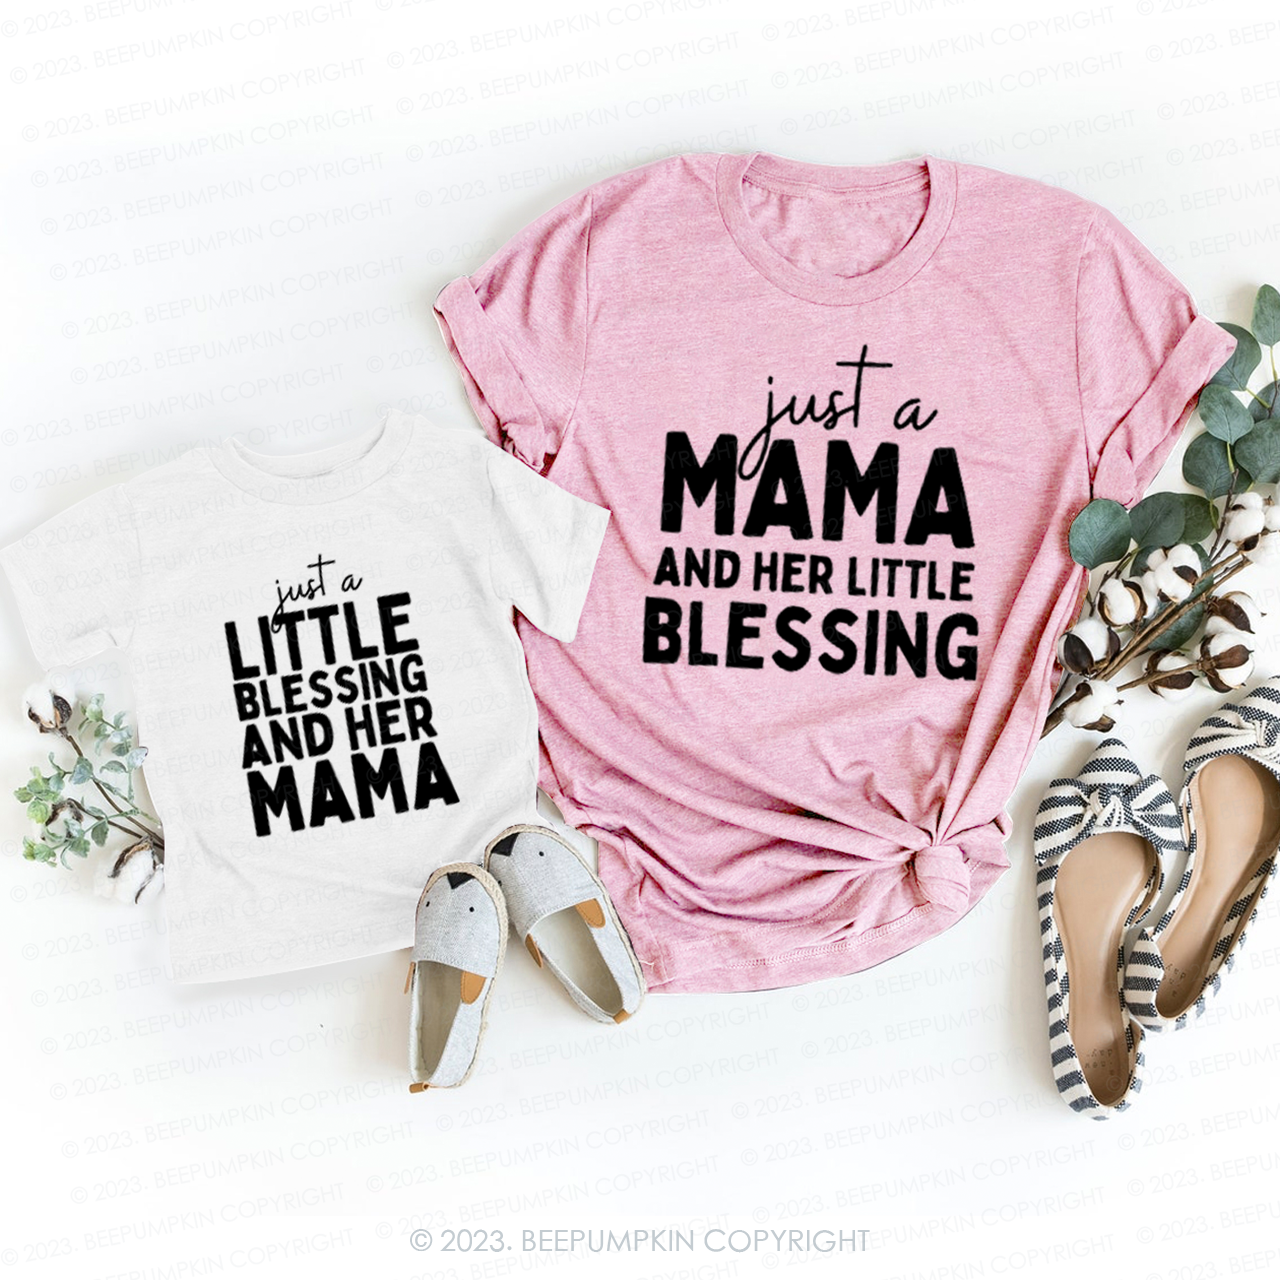  Just A Mama And Little Blessings T-Shirts For Mom&Me